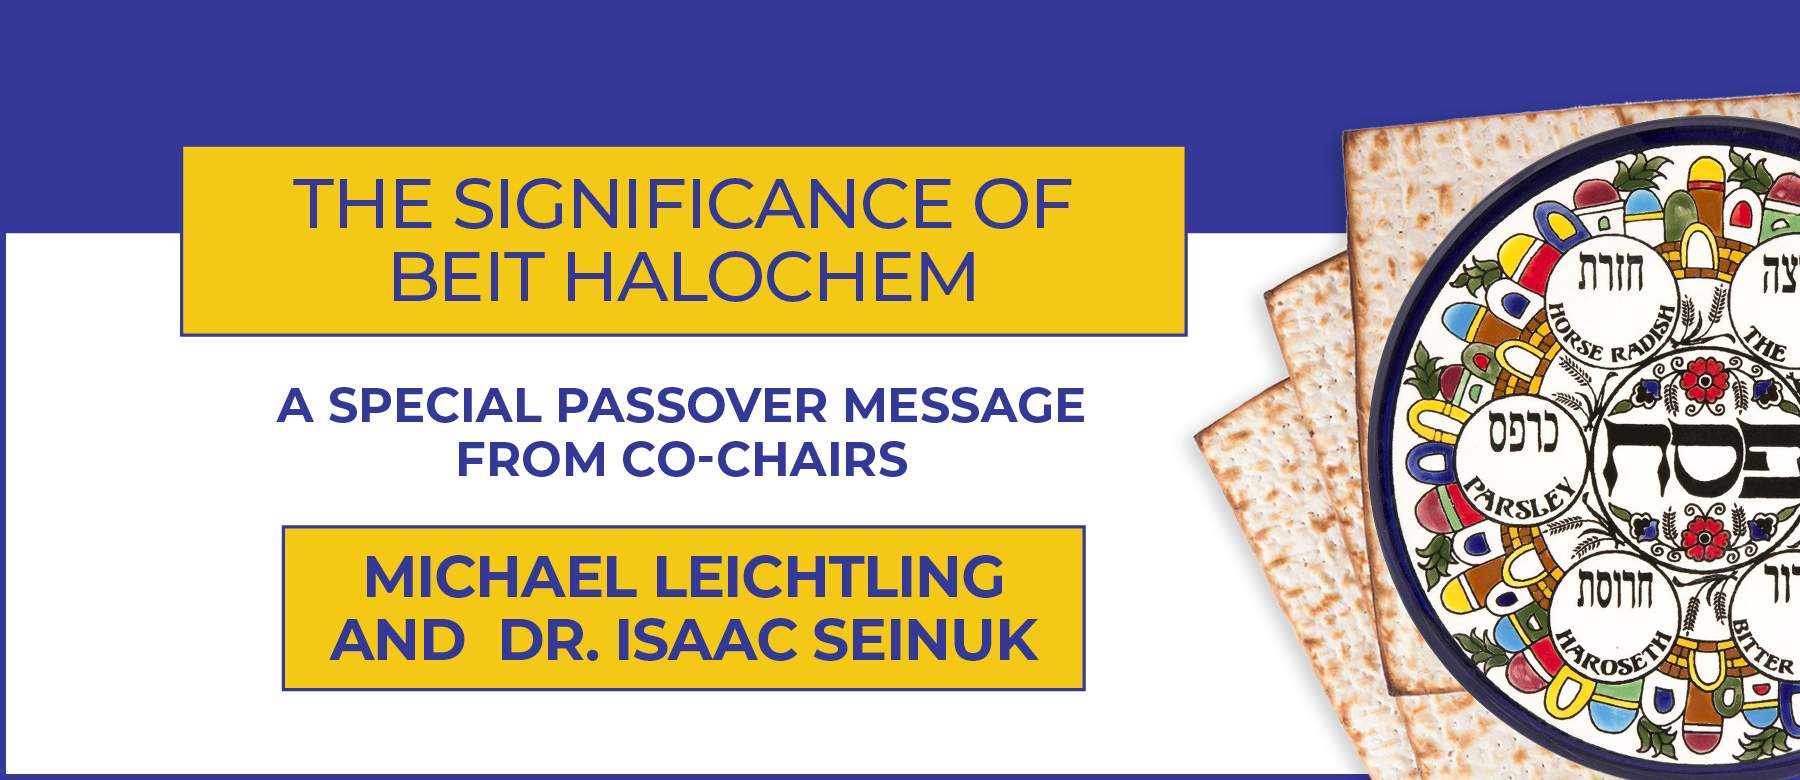 The significance of Beit Halochem with a Seder plate and matzah